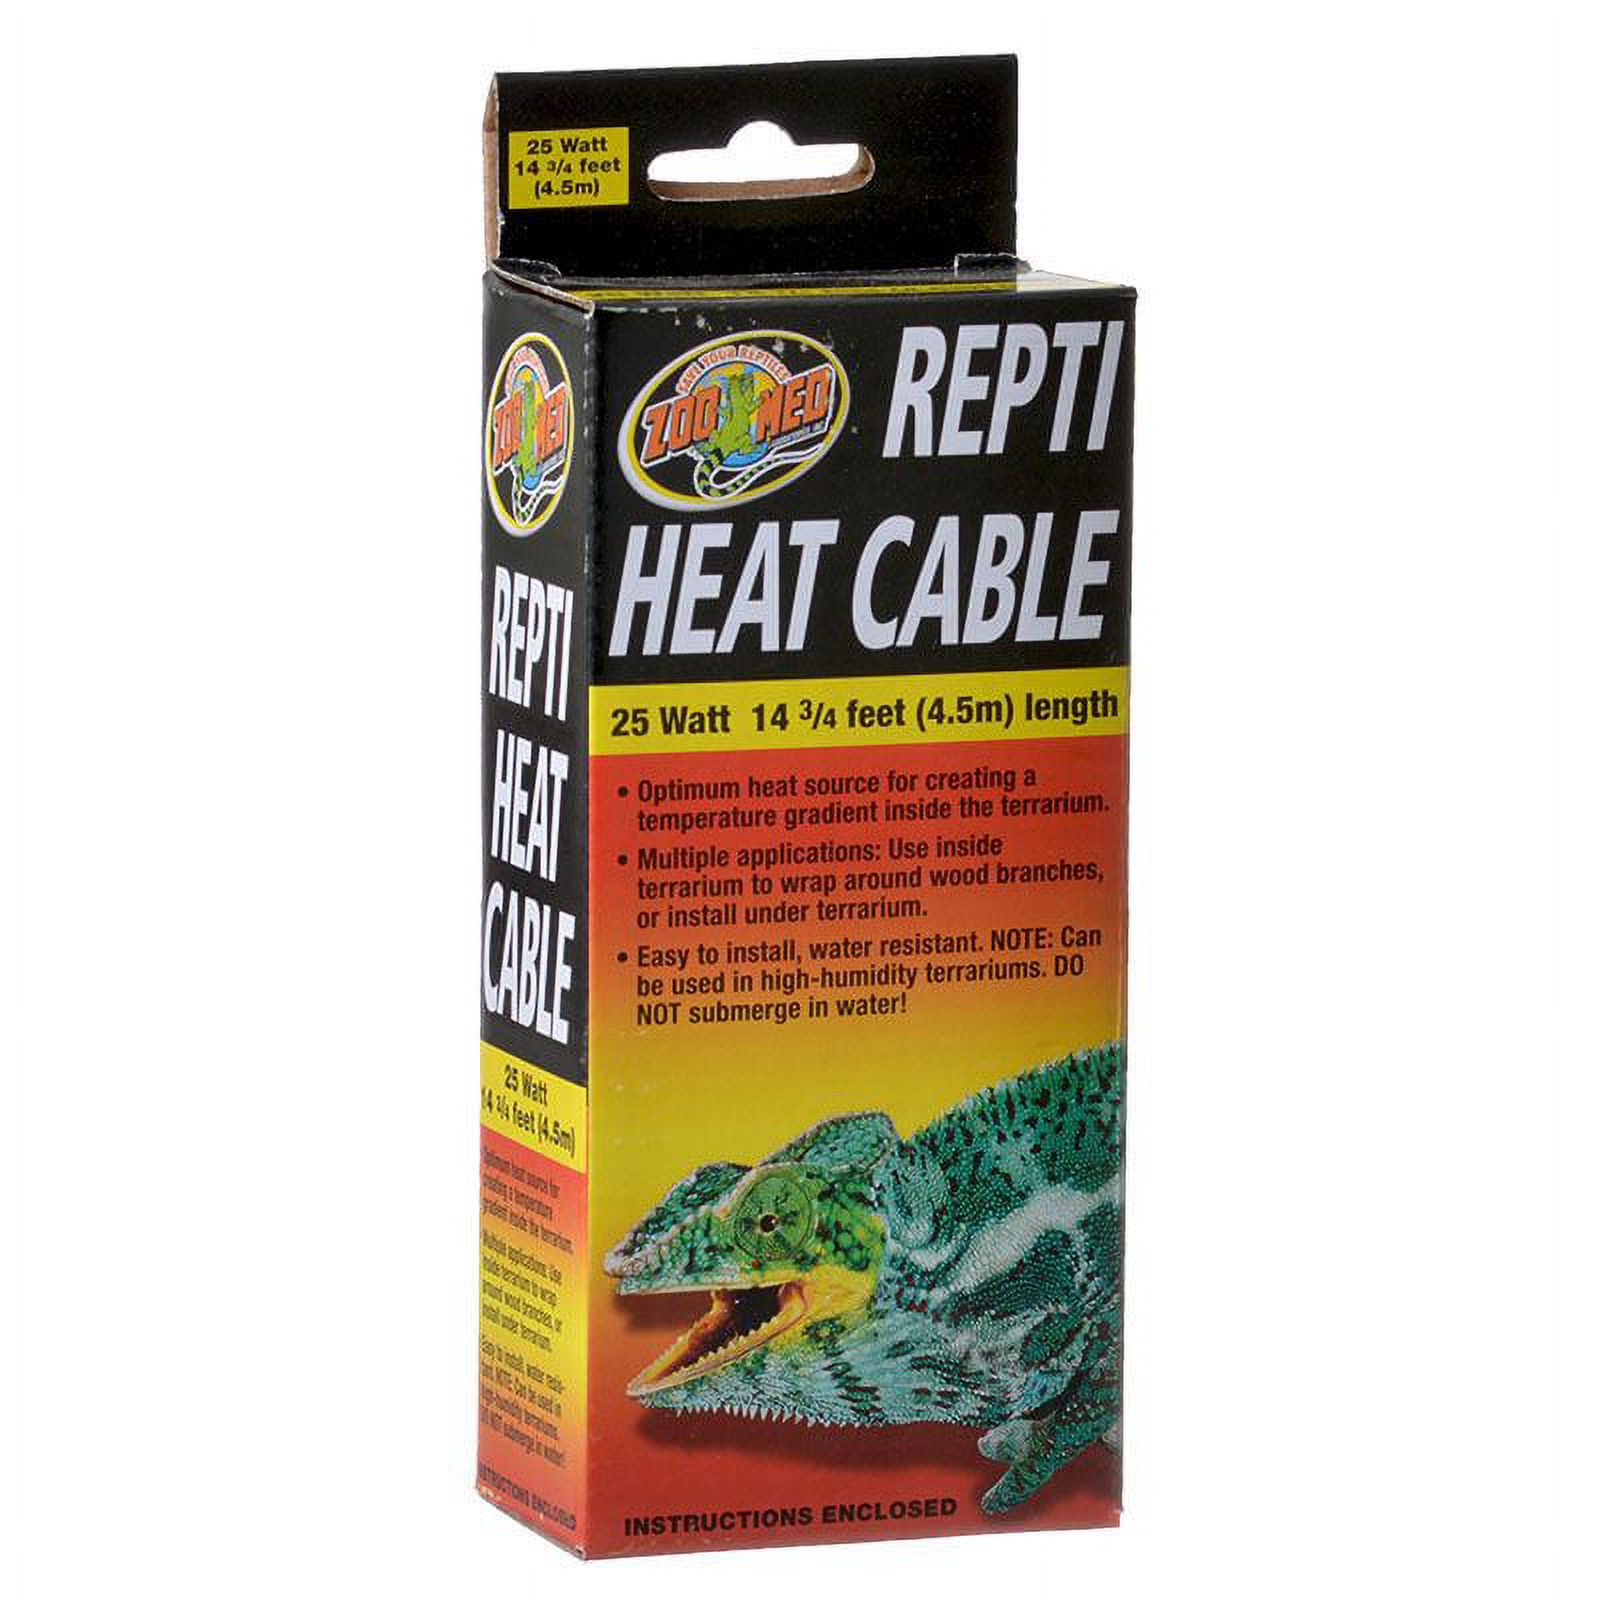 Zoo Med Repti Heat Cable 25 Watts 14.75 ft - image 1 of 2